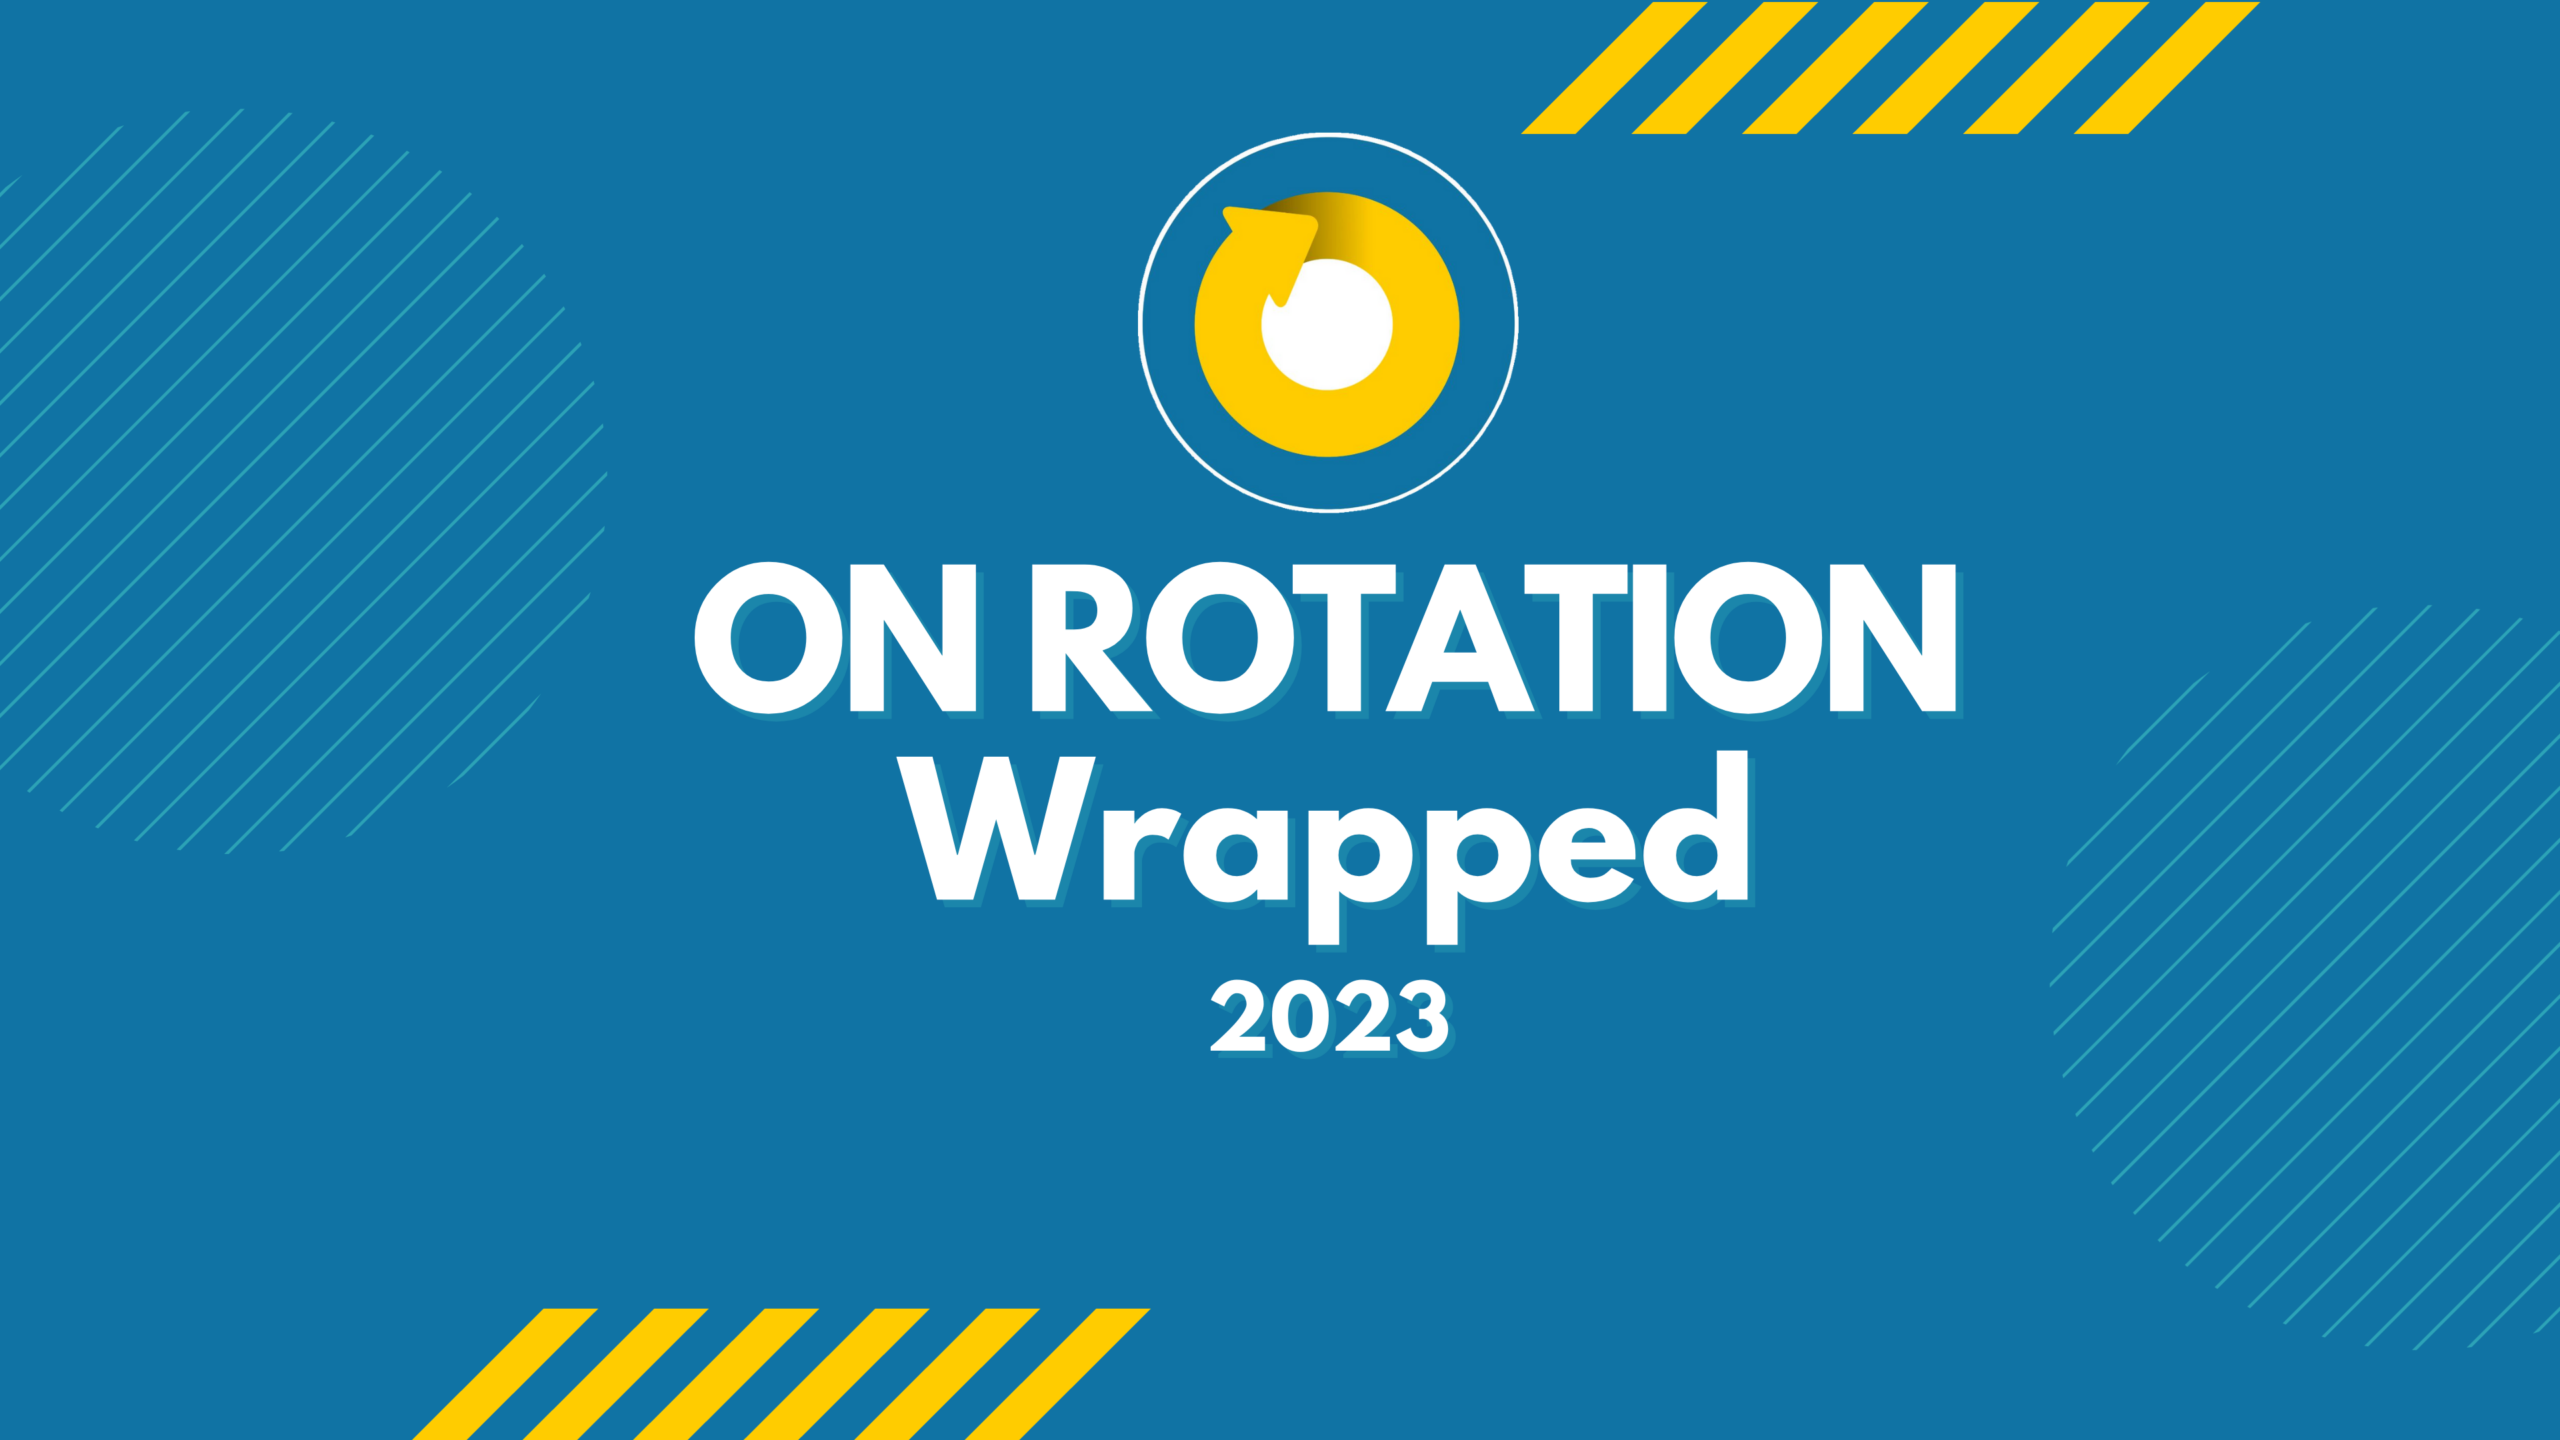 On Rotation Wrapped 2023